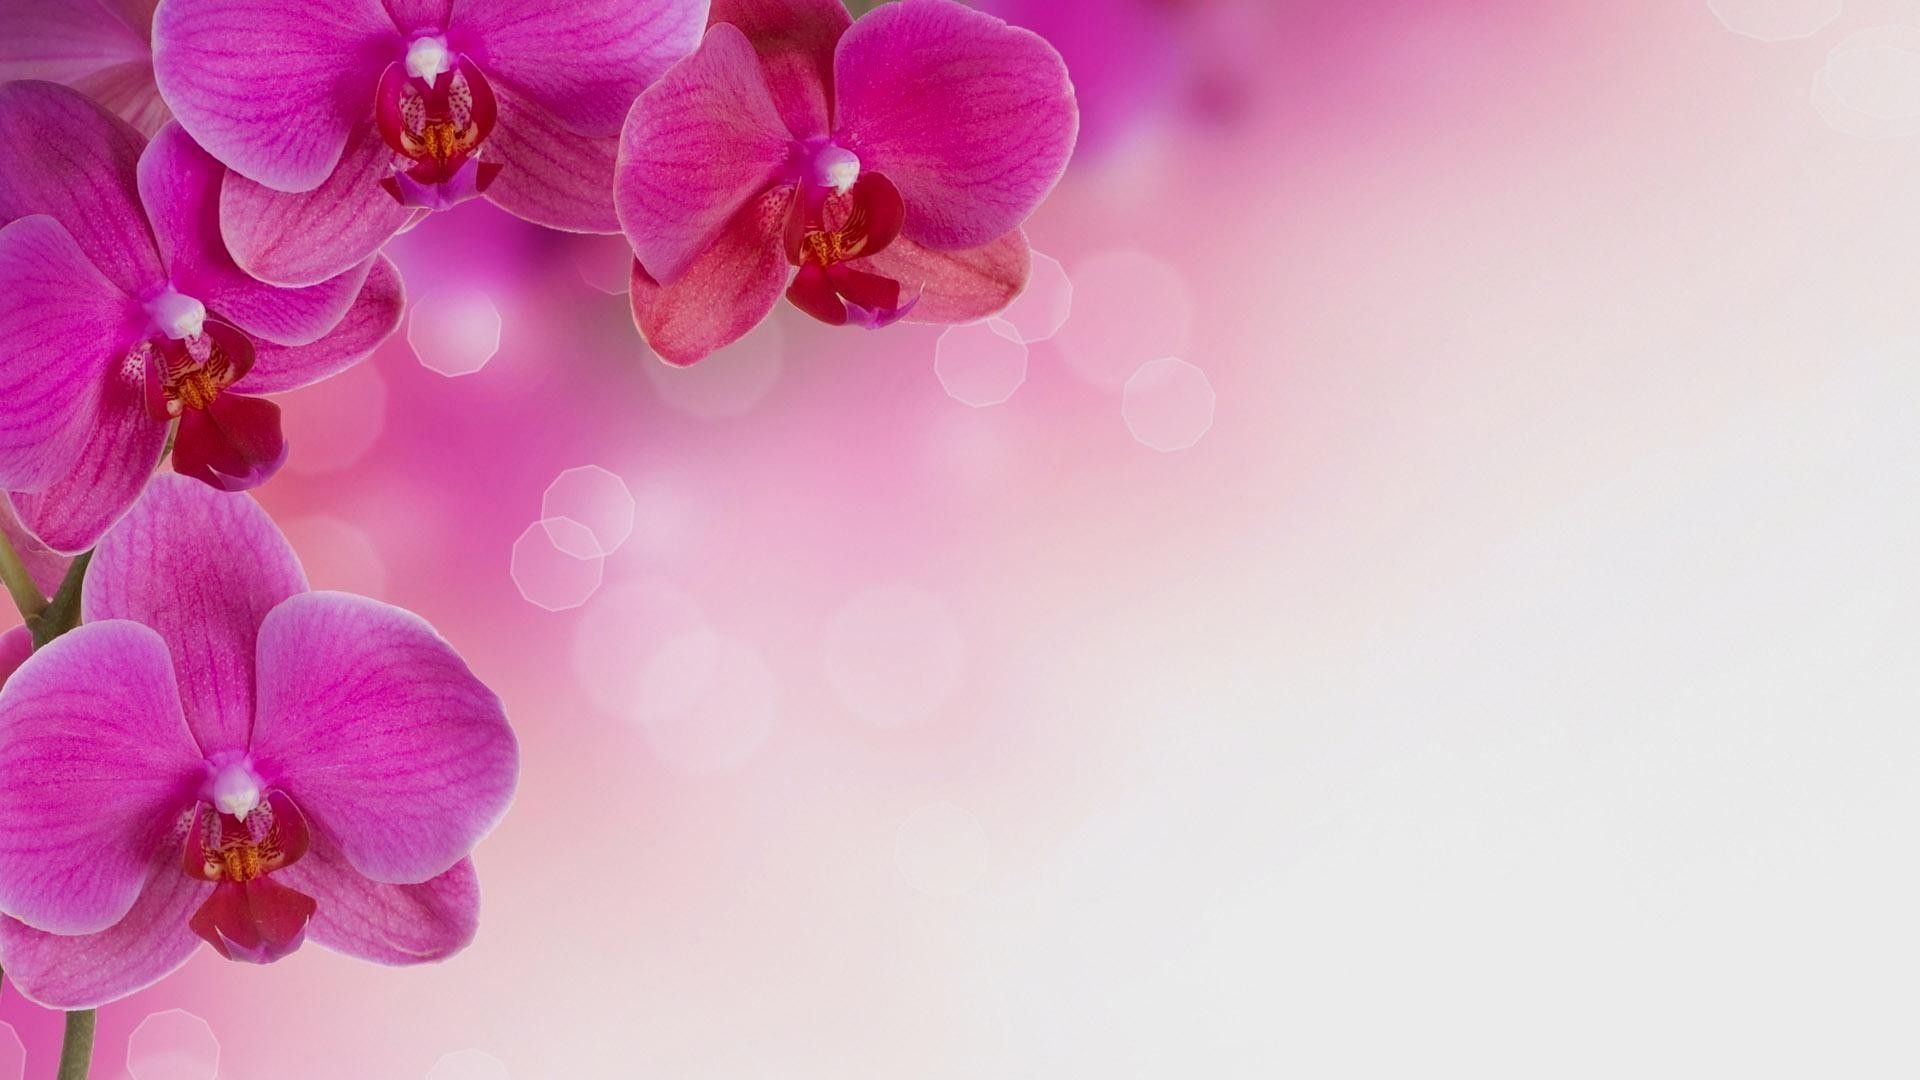 Orchid HD Wallpaper Picture Image